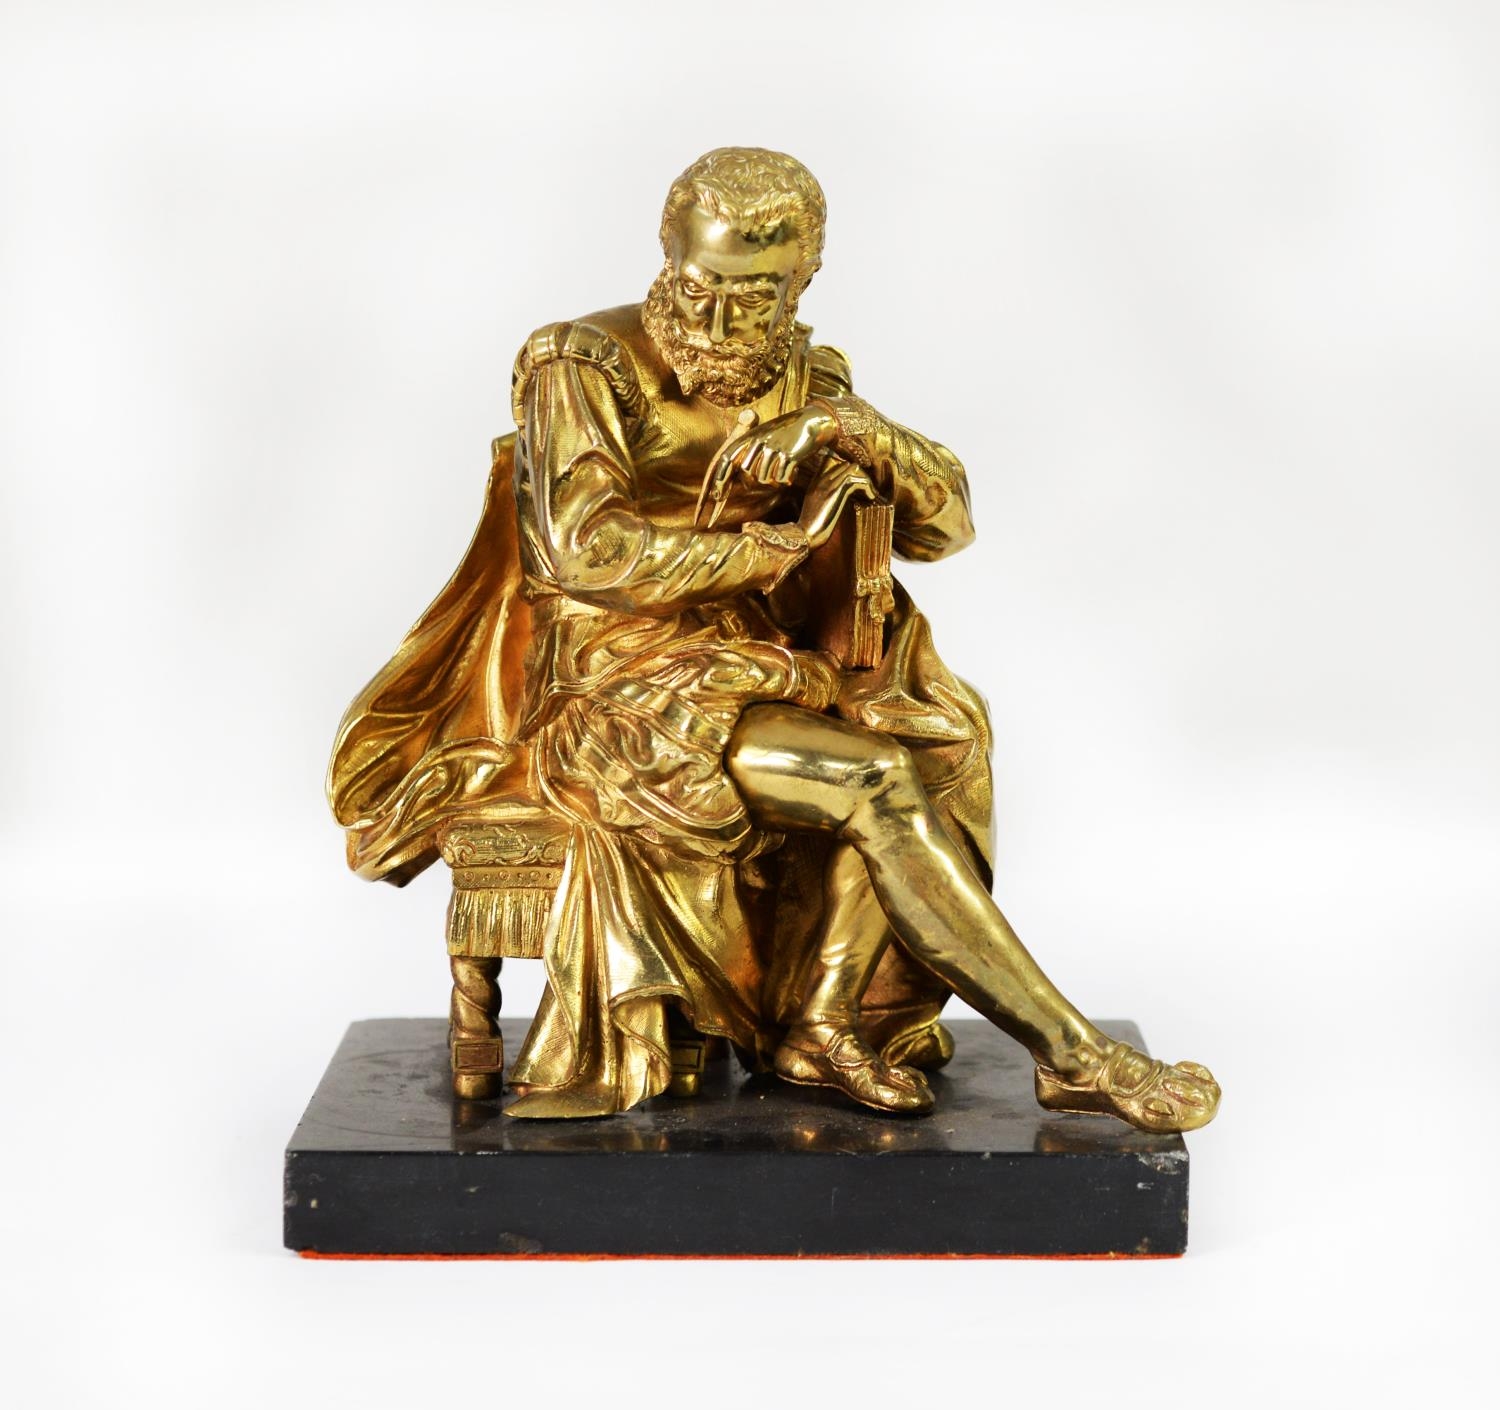 EARLY 20th CENTURY GILT BRASS FIGURE OF AN ELIZABETHAN GENTLEMAN SEATED ON A STOOL, possibly